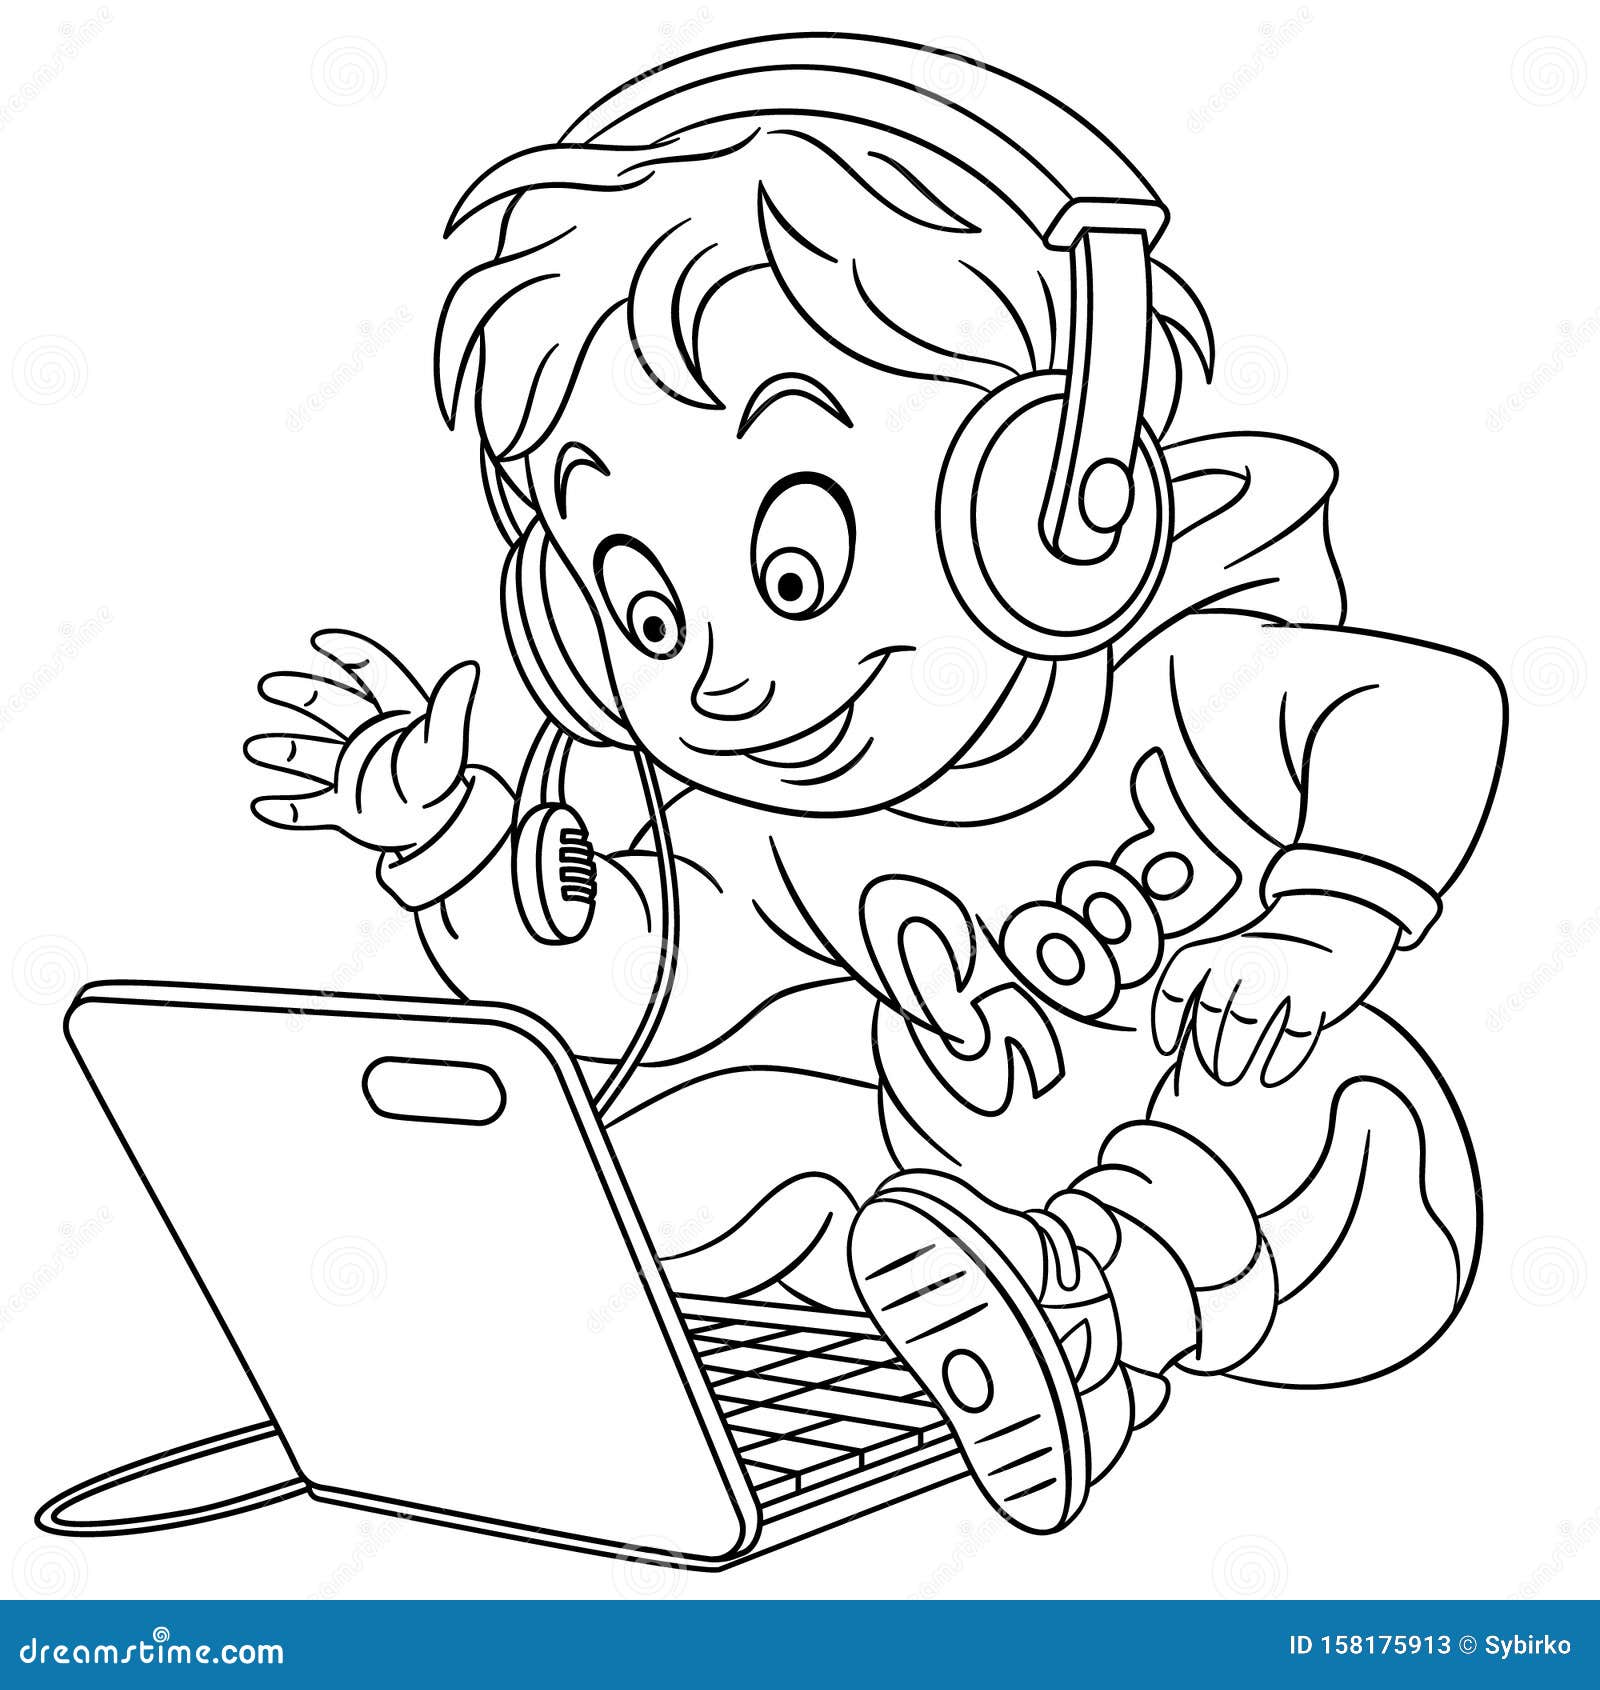 Coloring page with video cyber e